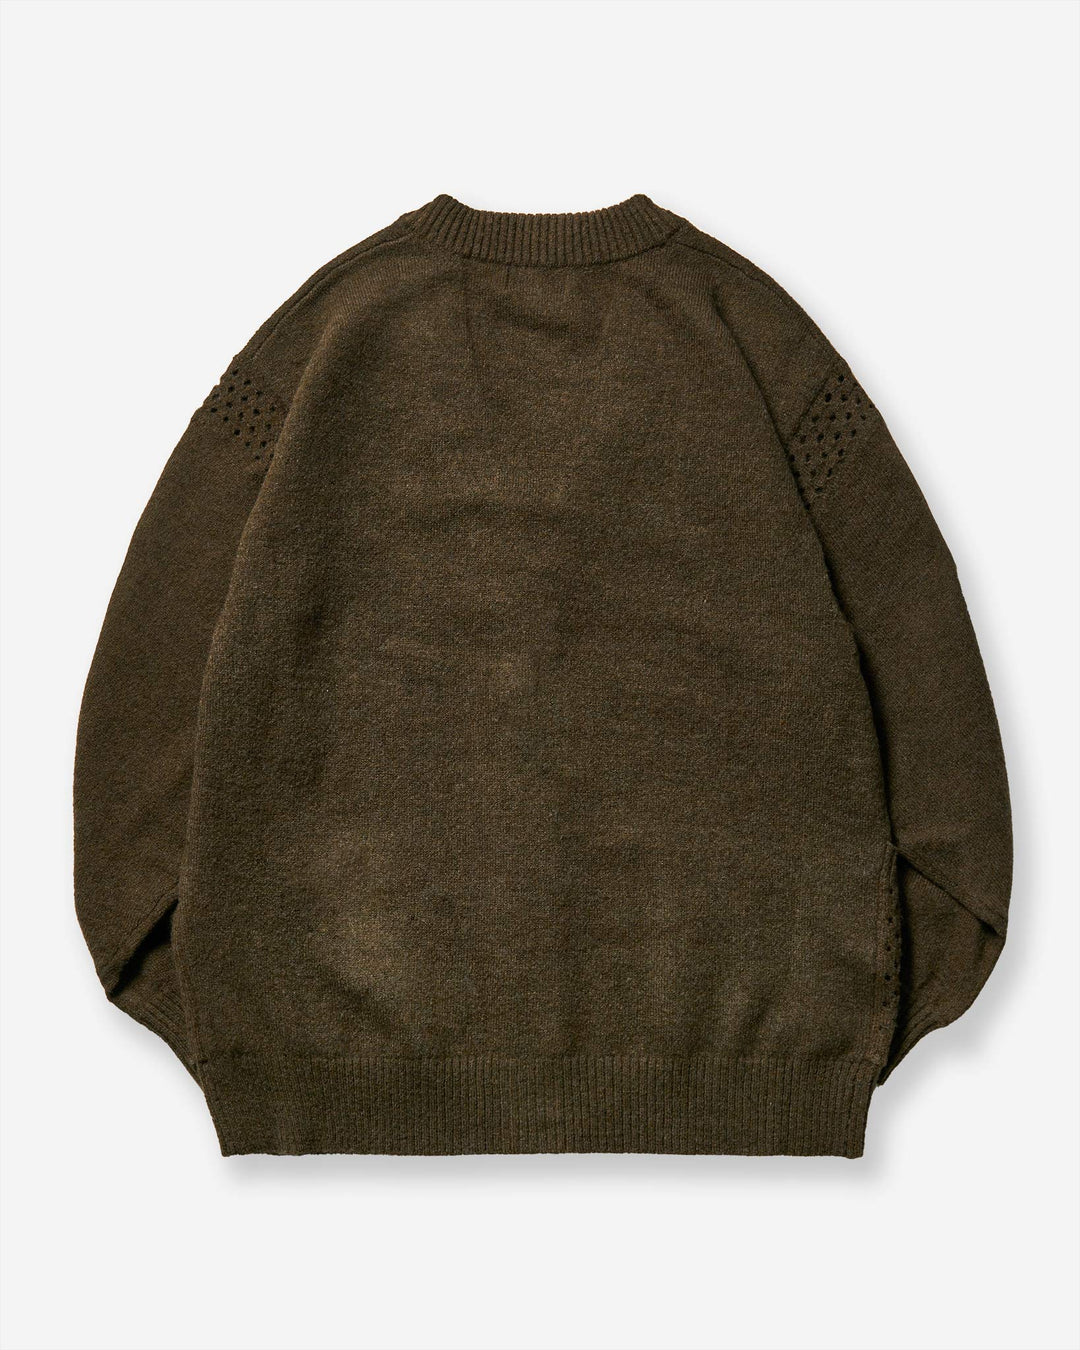 Vent Panel Knit Cardigan - Coyote